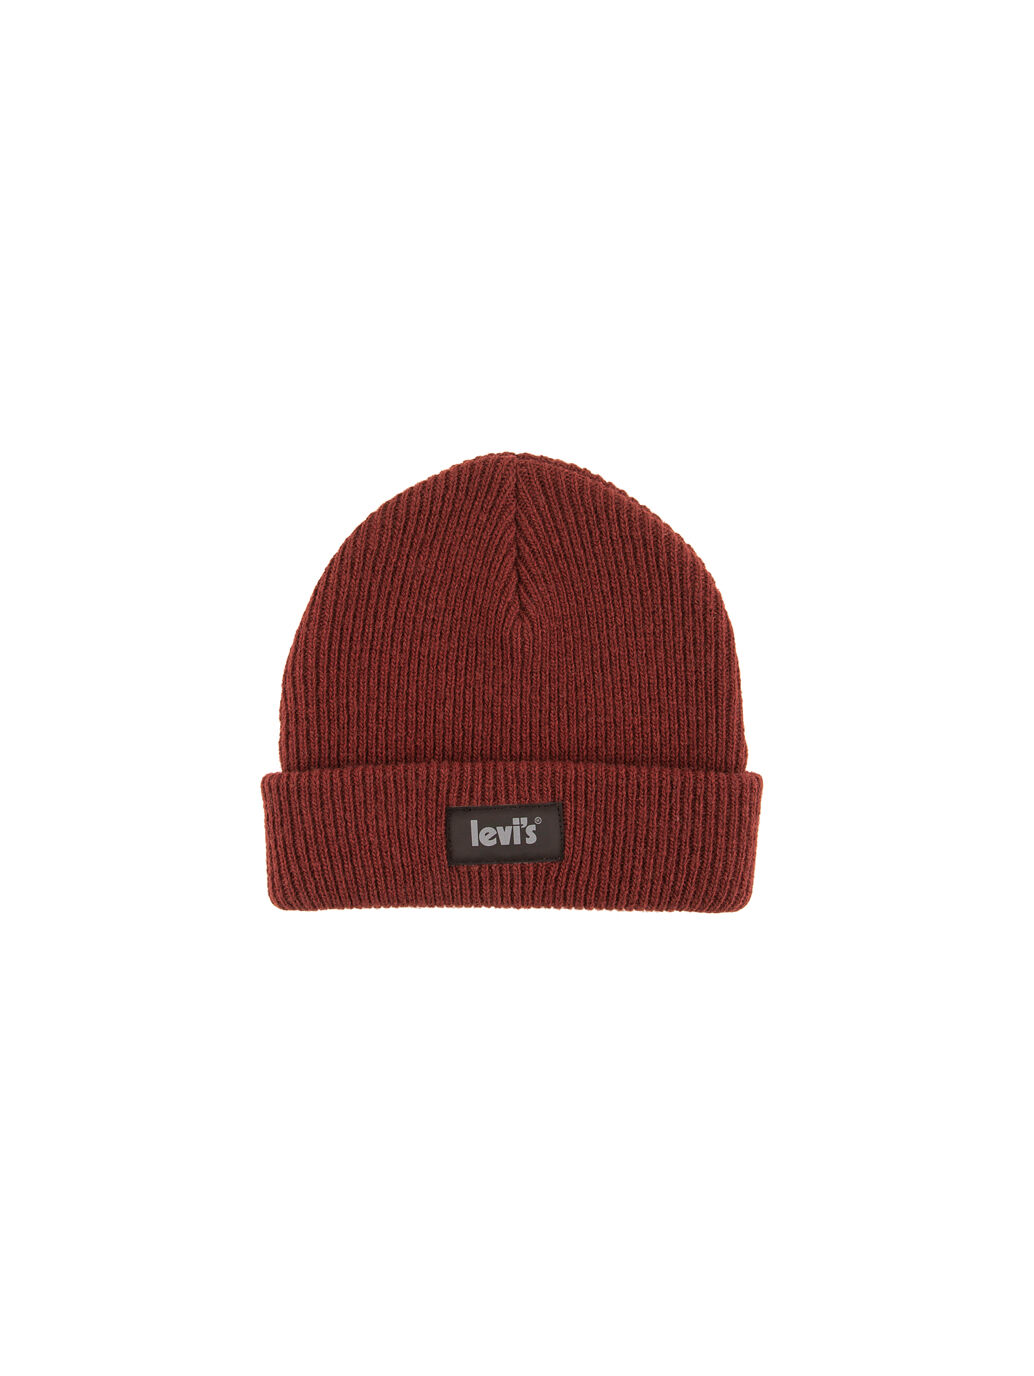 Beanie with Reflective Poster Logo in Bordeaux